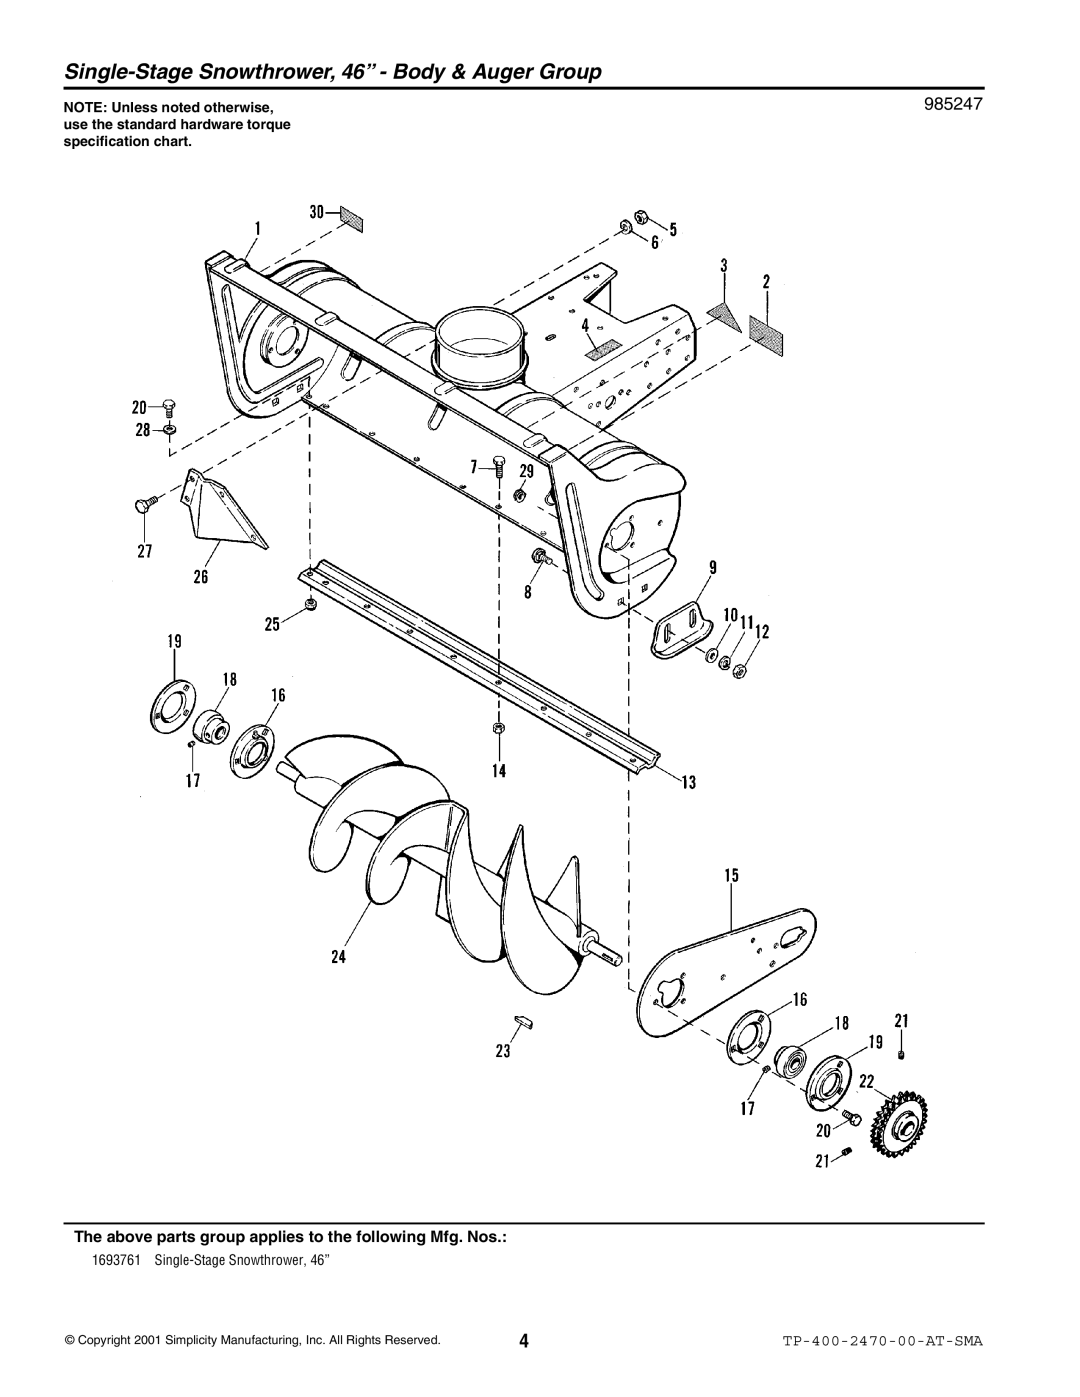 Snapper Single-Stage Snowthrower, 46” - Body & Auger Group, 985247, TP-400-2470-00-AT-SMA, NOTE Unless noted otherwise 